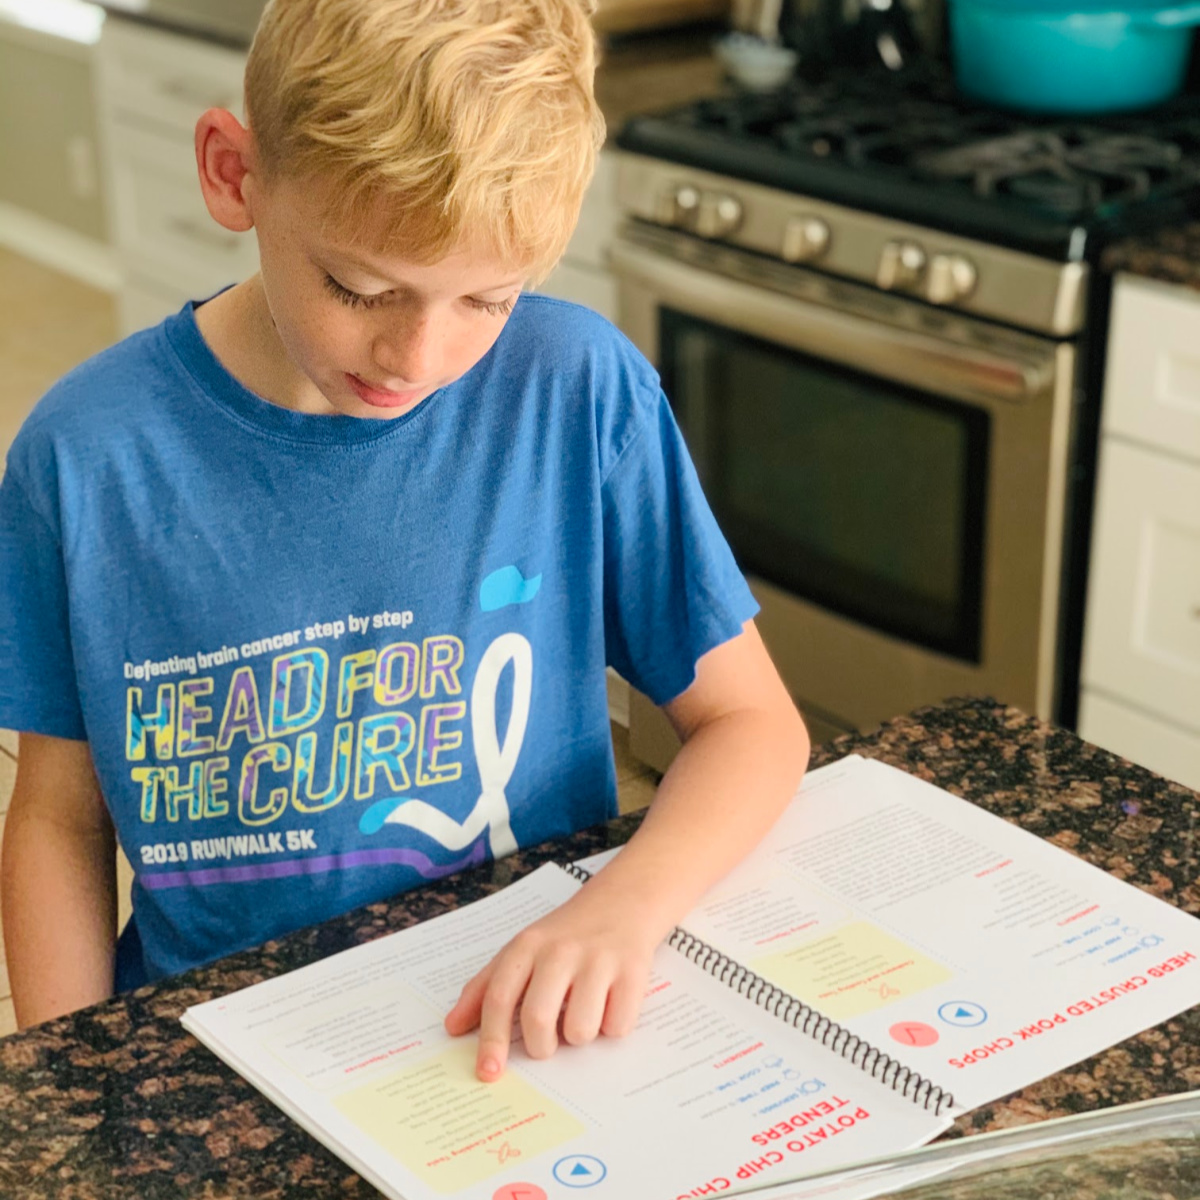 kids cooking with whis-kid guidebook